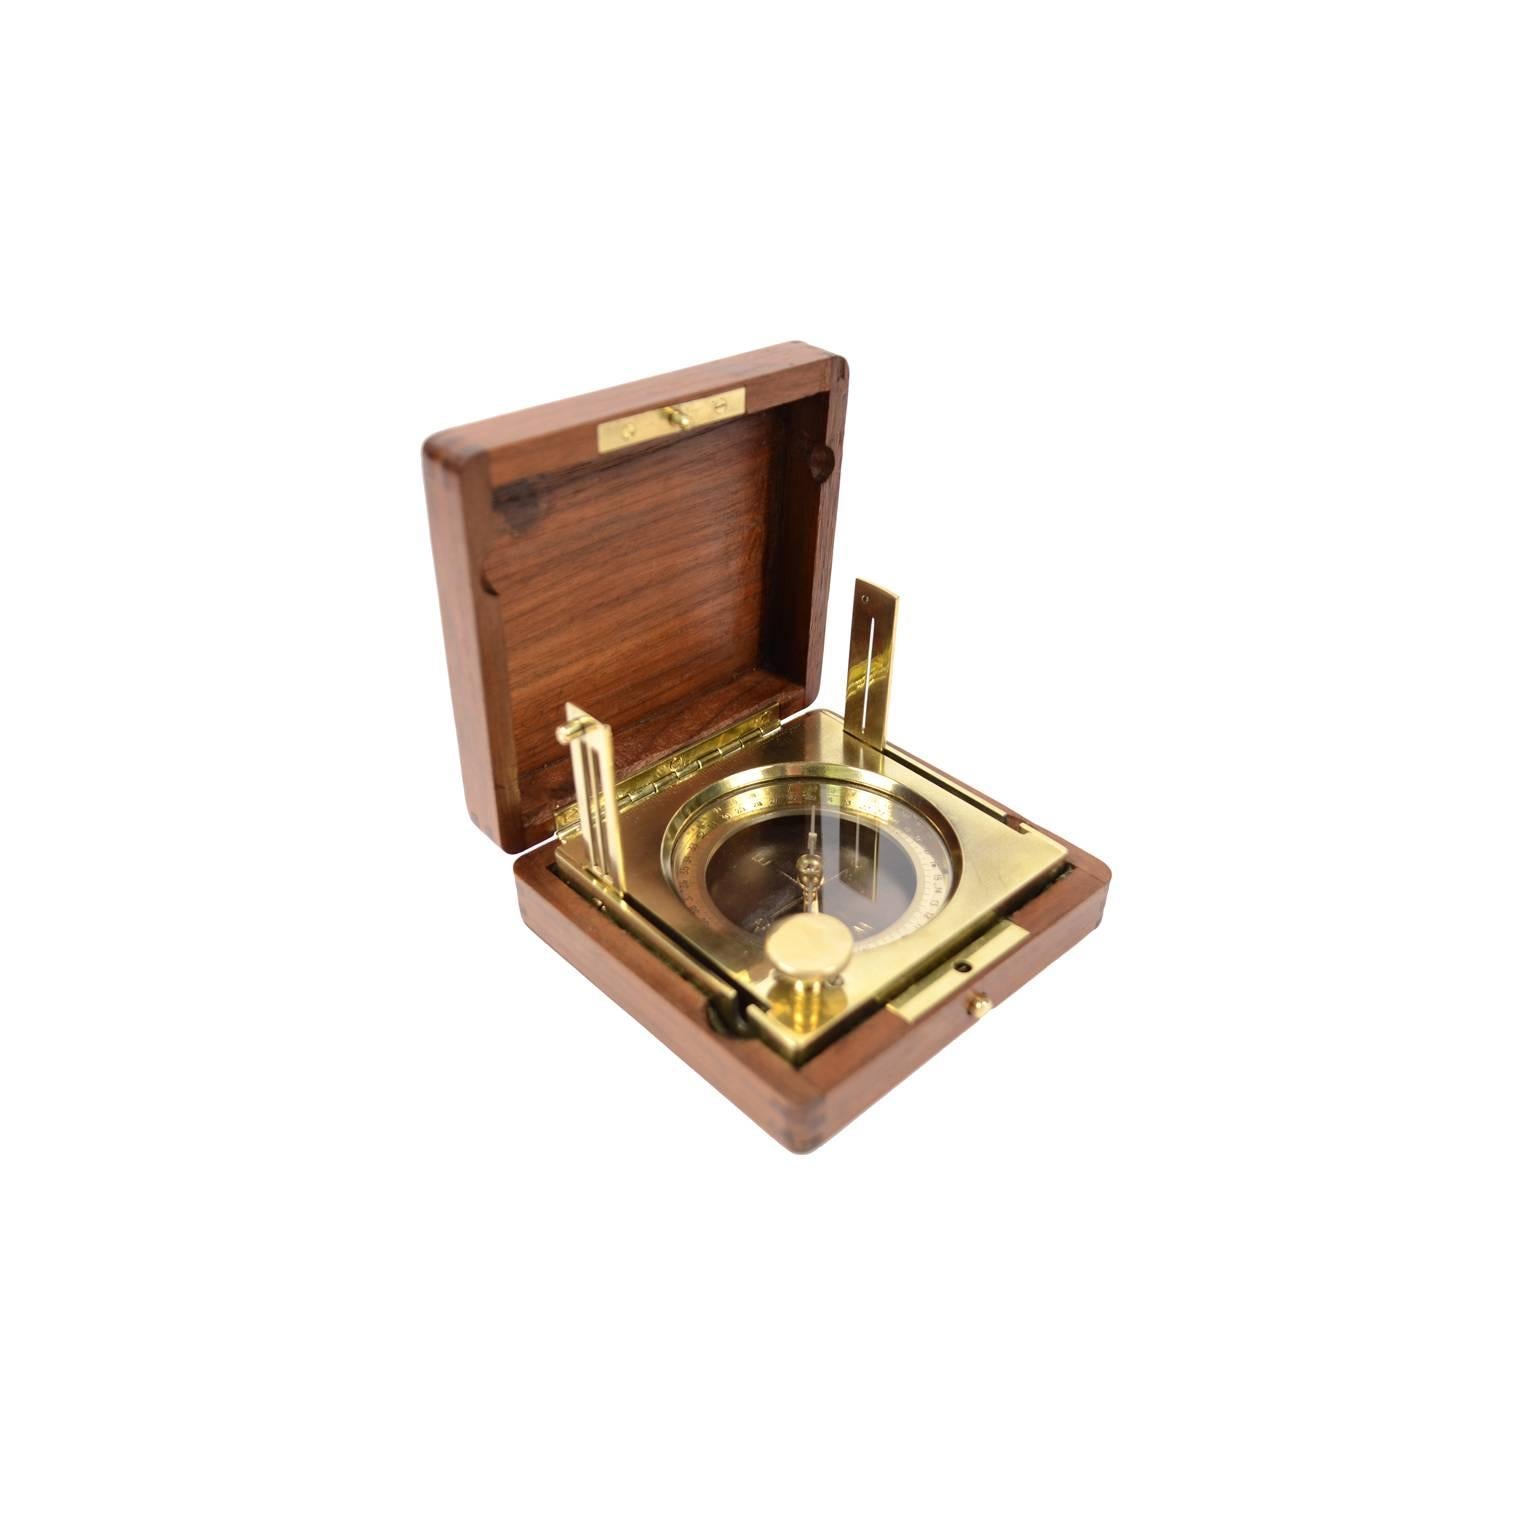 Brass topographic compass signed Stoppani (a Swiss manufacturer created in 1913 and located in Bern) placed in its original walnut box, circa 1915. The compass consists of a magnetized needle free to rotate on a horizontal plane, marking with its